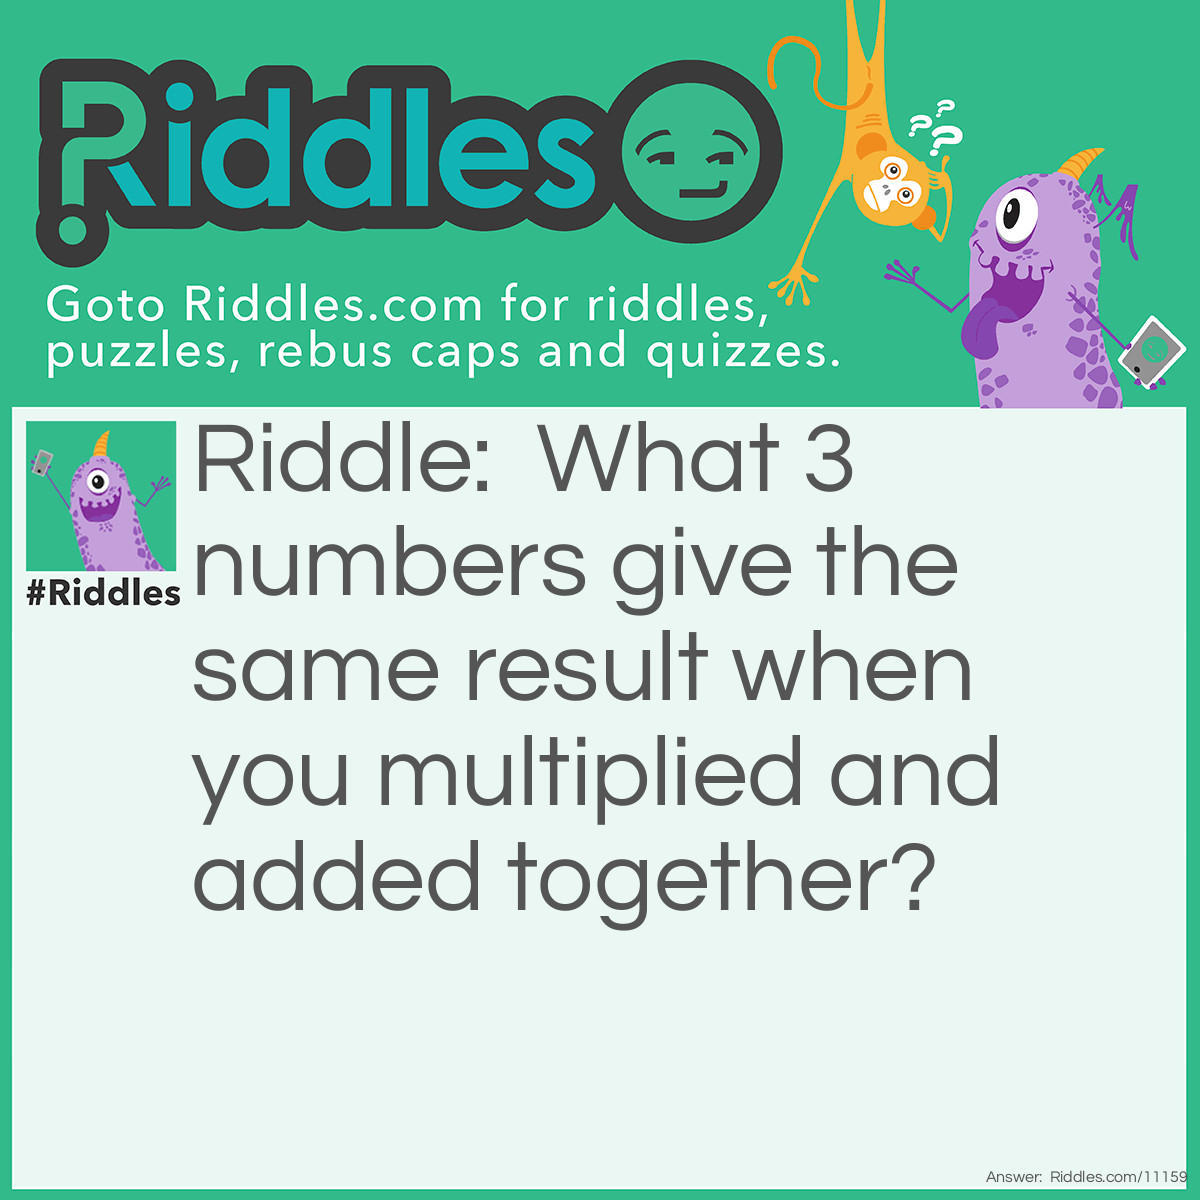 Riddle: What 3 numbers give the same result when you multiplied and added together? Answer: 1,2,3 1+2+3=6=3*2*1